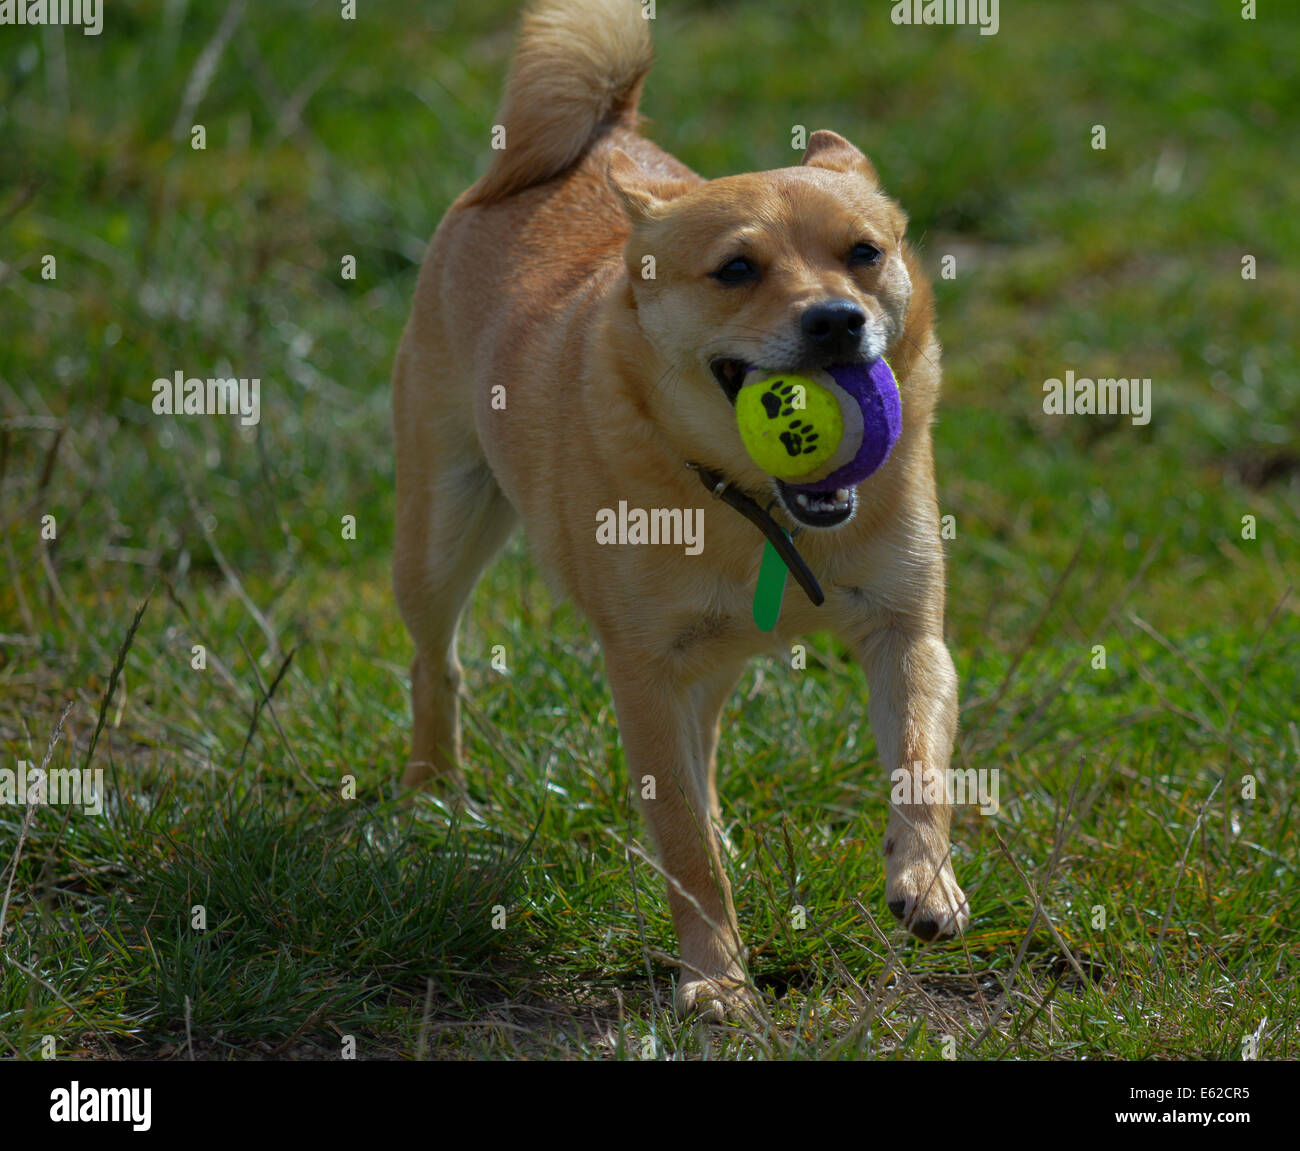 Small dog running with ball Stock Photo